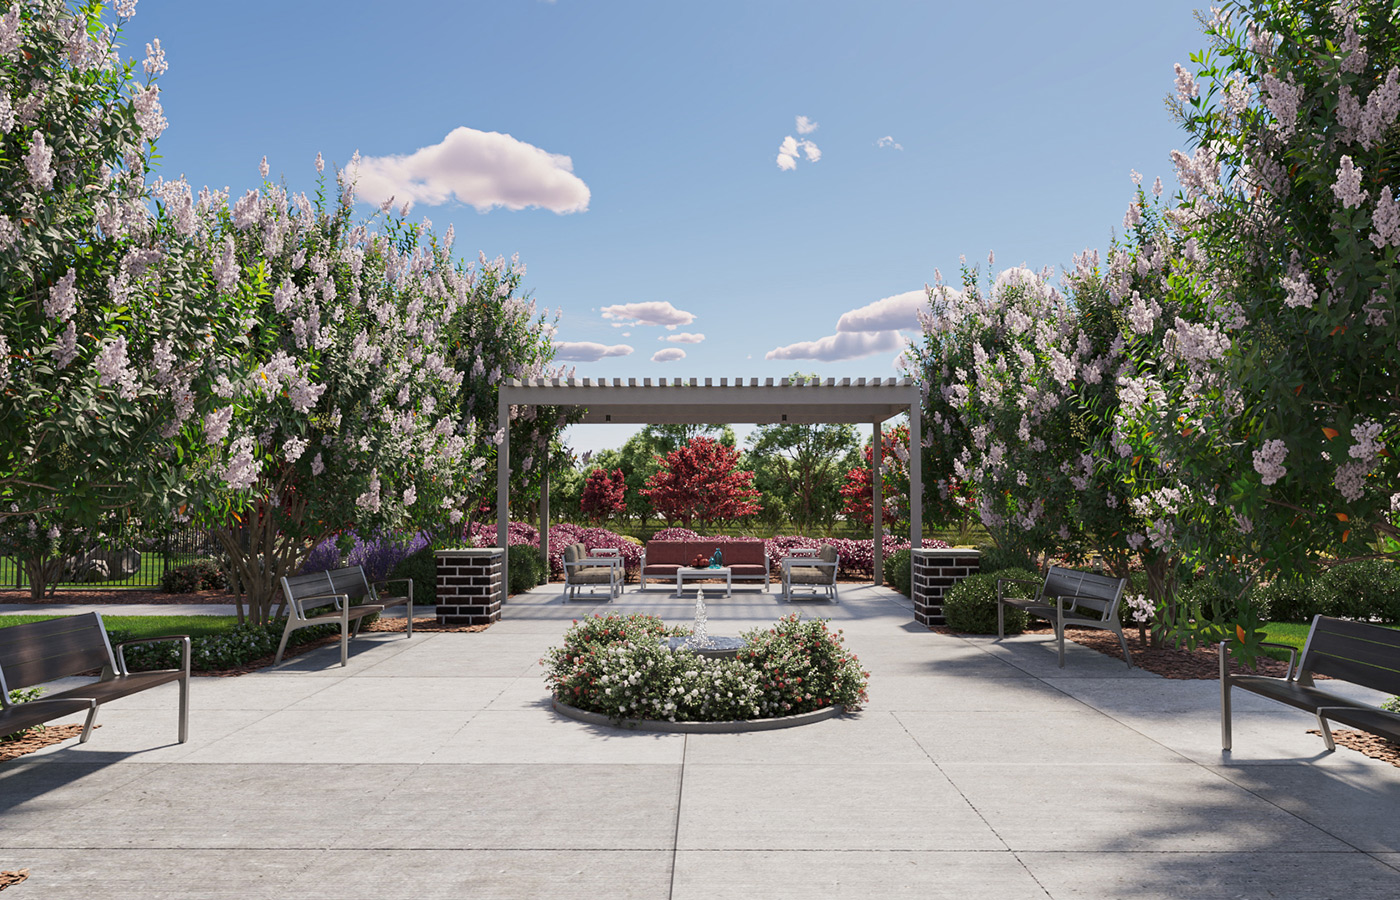 courtyard with gazebo surrounded by trees and flowers